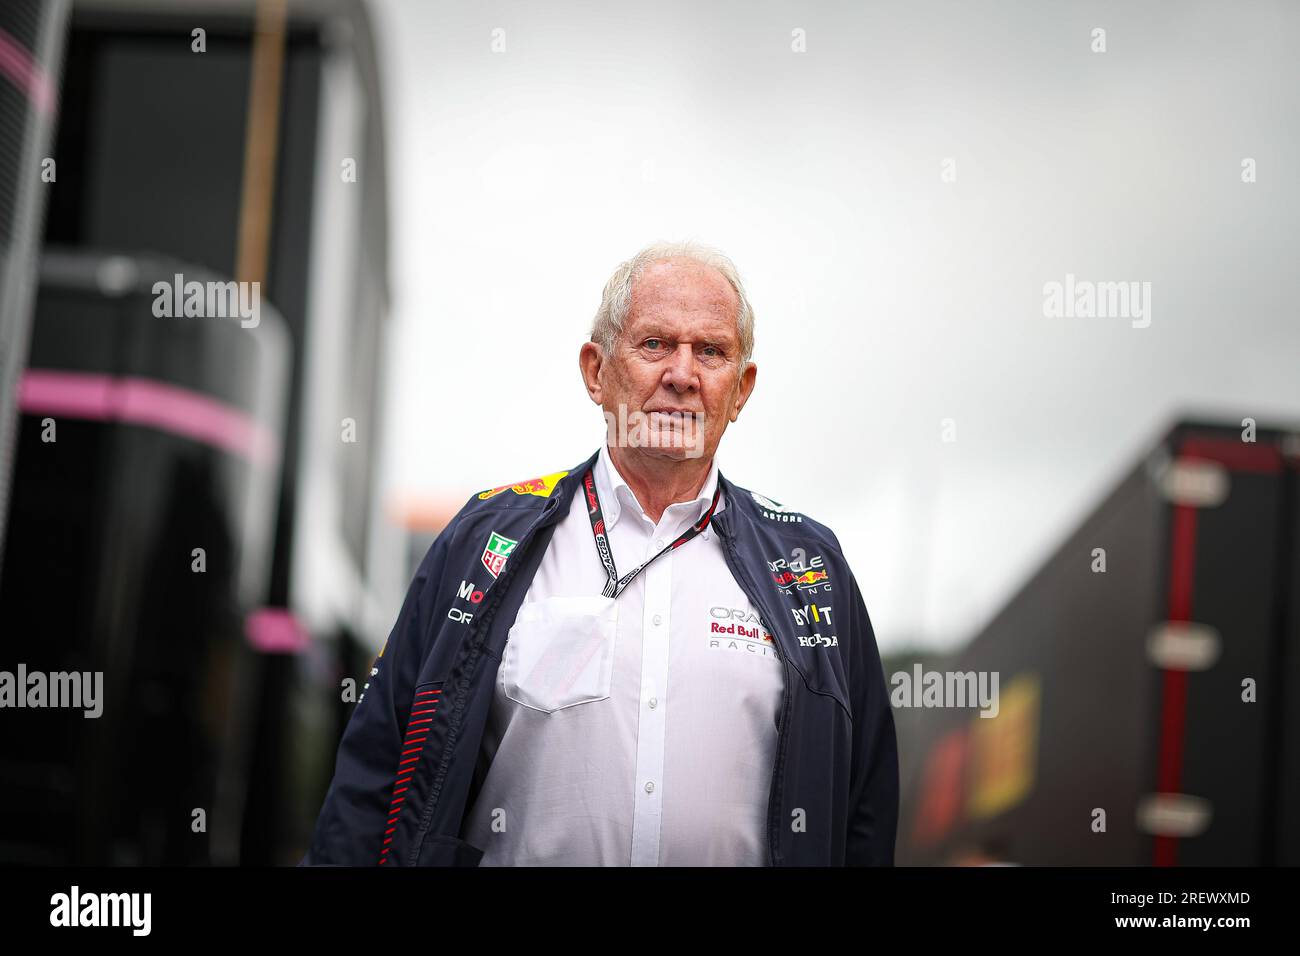 Spa-Francorchamps, Belgium. 30th July 2023. Helmut Marko driver advisor at Red Bull Racing former driver and head of Red Bull's driver development, during the Belgian GP, Spa-Francorchamps 27-30 July 2023 Formula 1 World championship 2023. Credit: Independent Photo Agency Srl/Alamy Live News Stock Photo